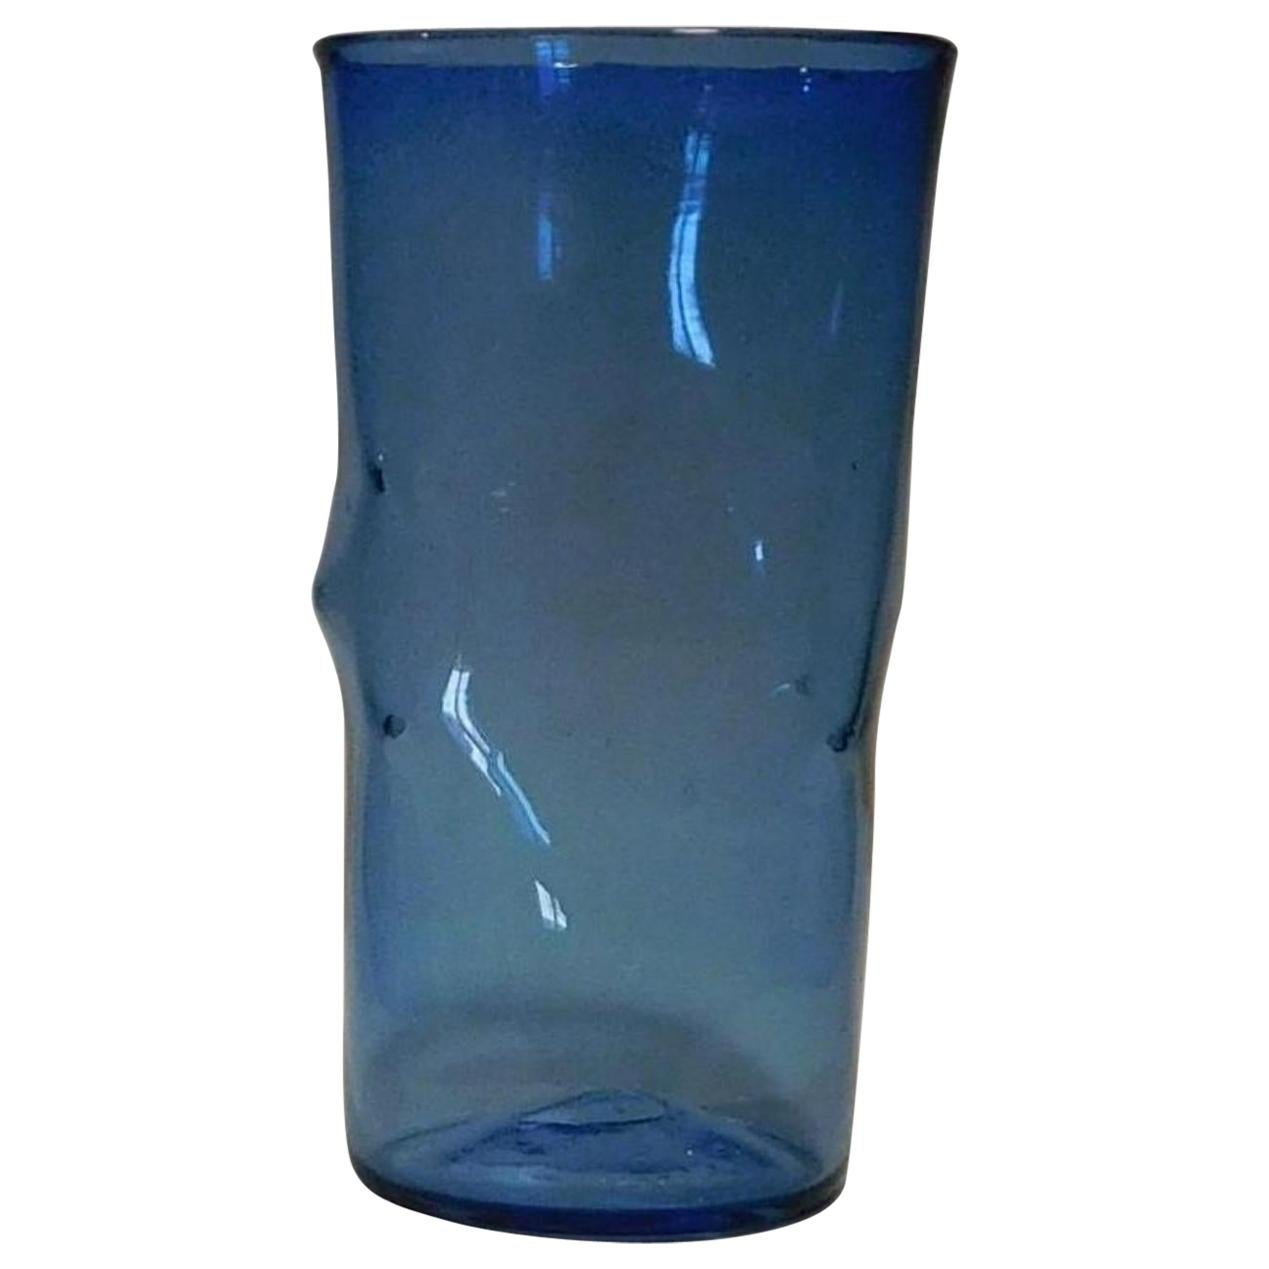 Blenko Large Pinched Vase in Bright Blue, Mint Condition For Sale